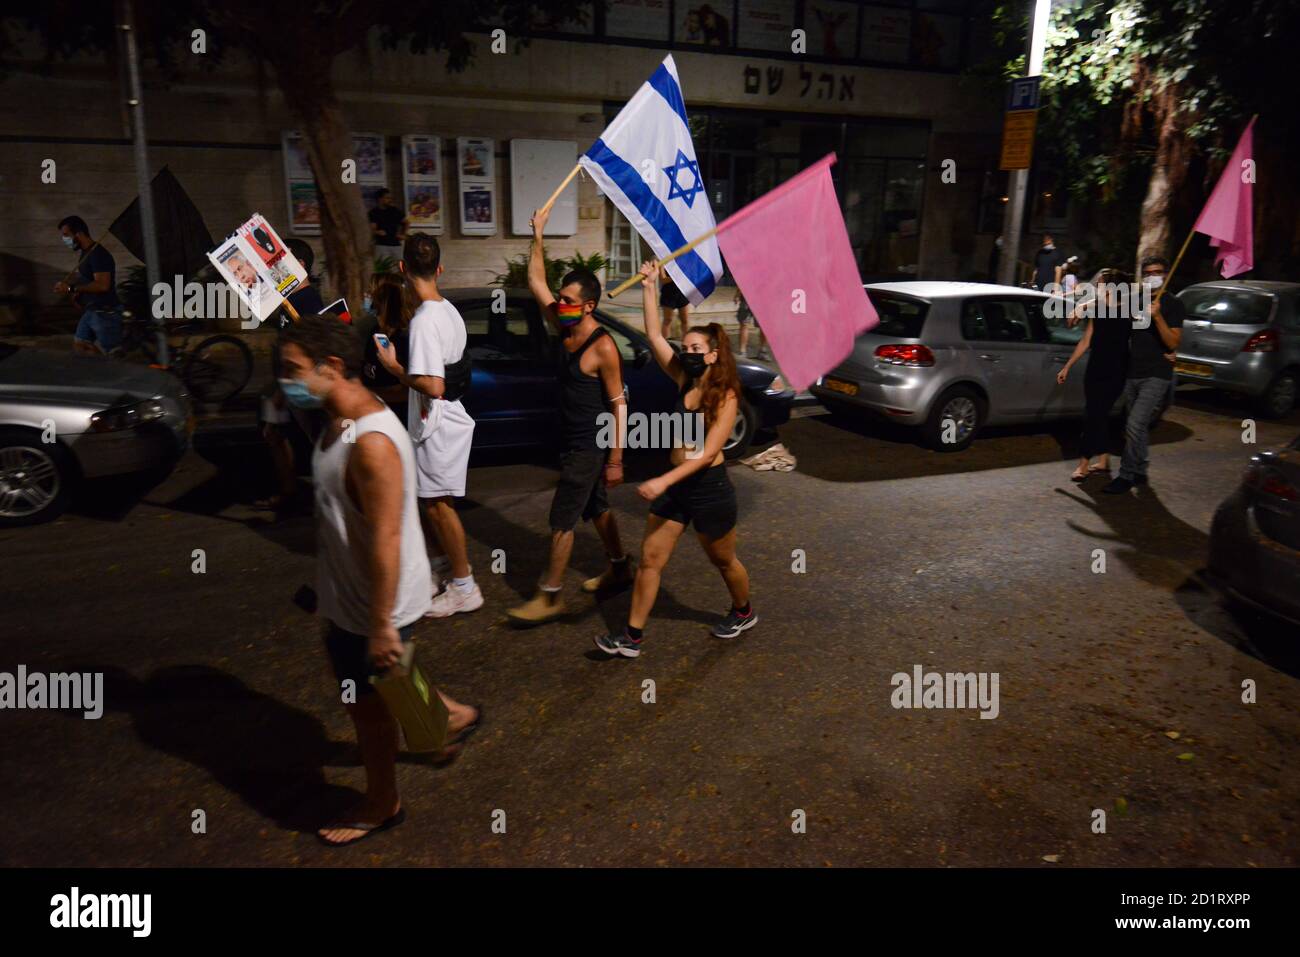 2.10.2020 Tel Aviv, Israel. Protest against Prime minister Netanyahu and second Coronavirus lockdown. Early stages of the protest in which hundreds were marching in Tel Aviv streets calling Bibi Netanyahu to resign. The pink flags symbolize the weakened populations, grace, empathy had become the youth symbol of what they see as the revolution Stock Photo